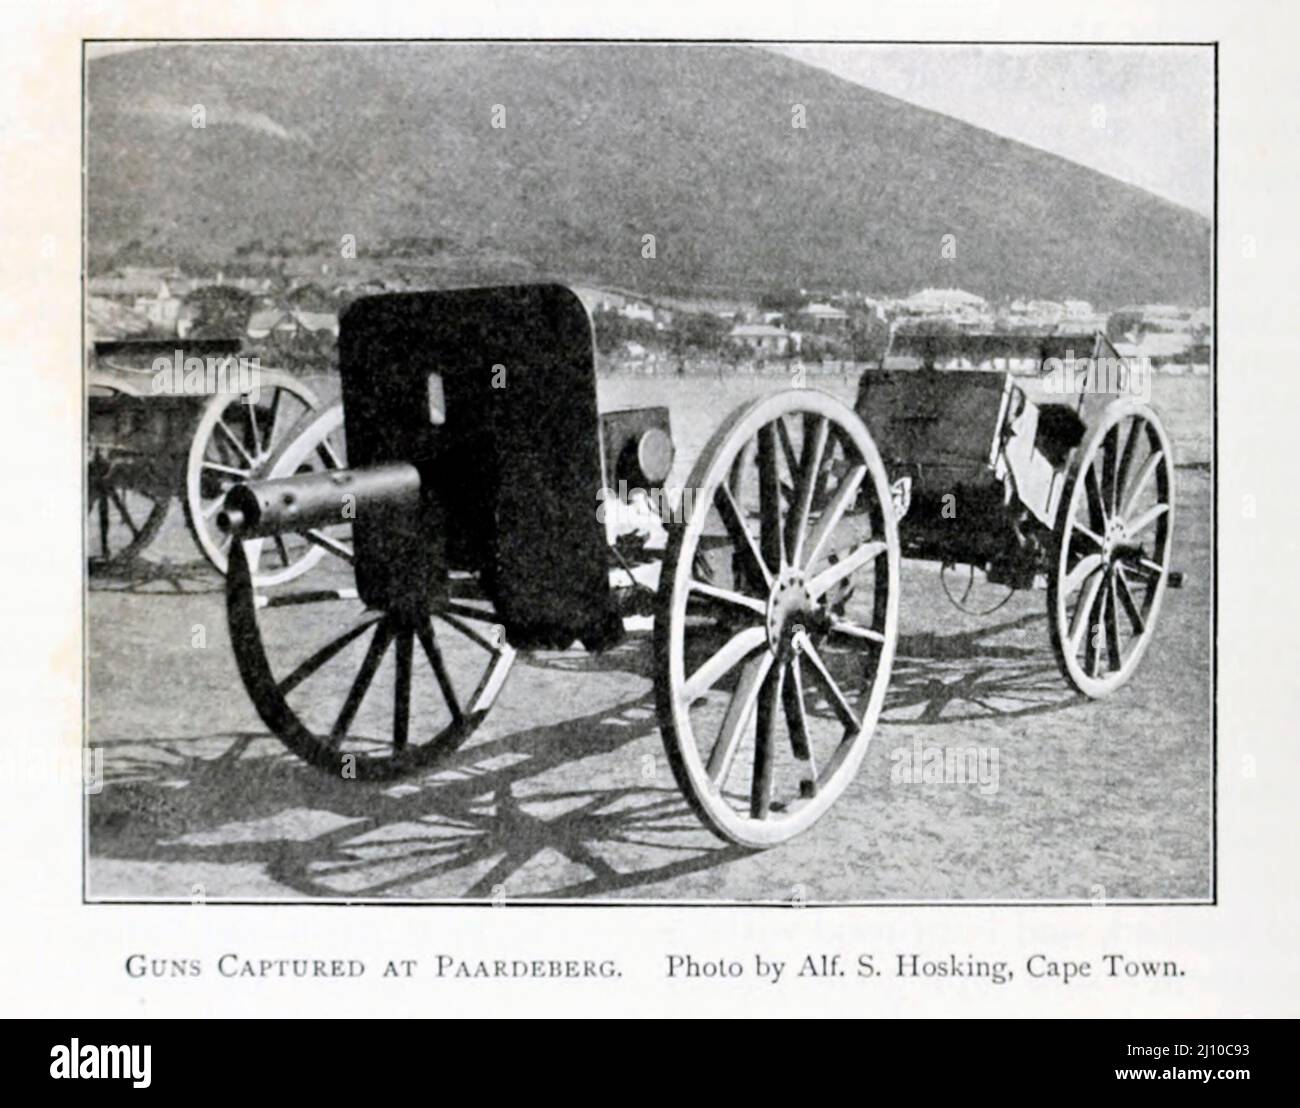 Guns Captured at Paardeberg from the book ' South Africa and the Transvaal war ' by Louis Creswicke, Publisher; Edinburgh : T. C. & E. C. Jack 1900 Stock Photo